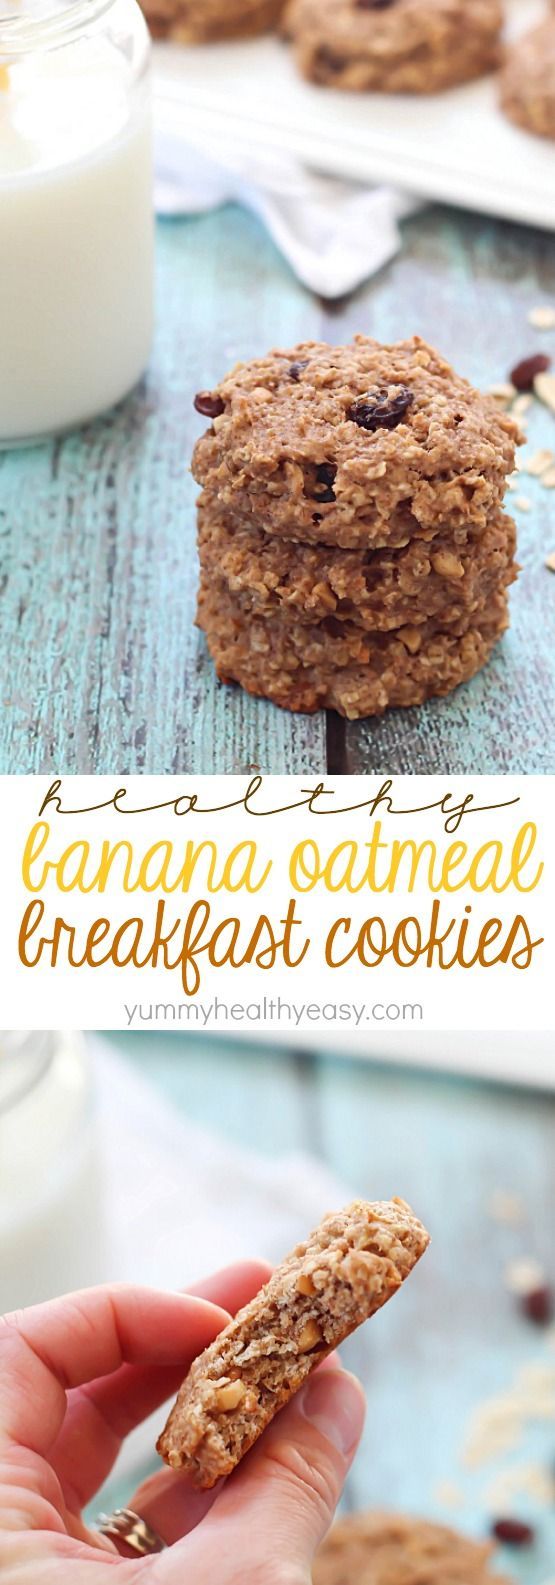 These Healthy Banana Oatmeal Breakfast Cookies are SO easy to make, have no butter or oil, and have only 165 calories in each